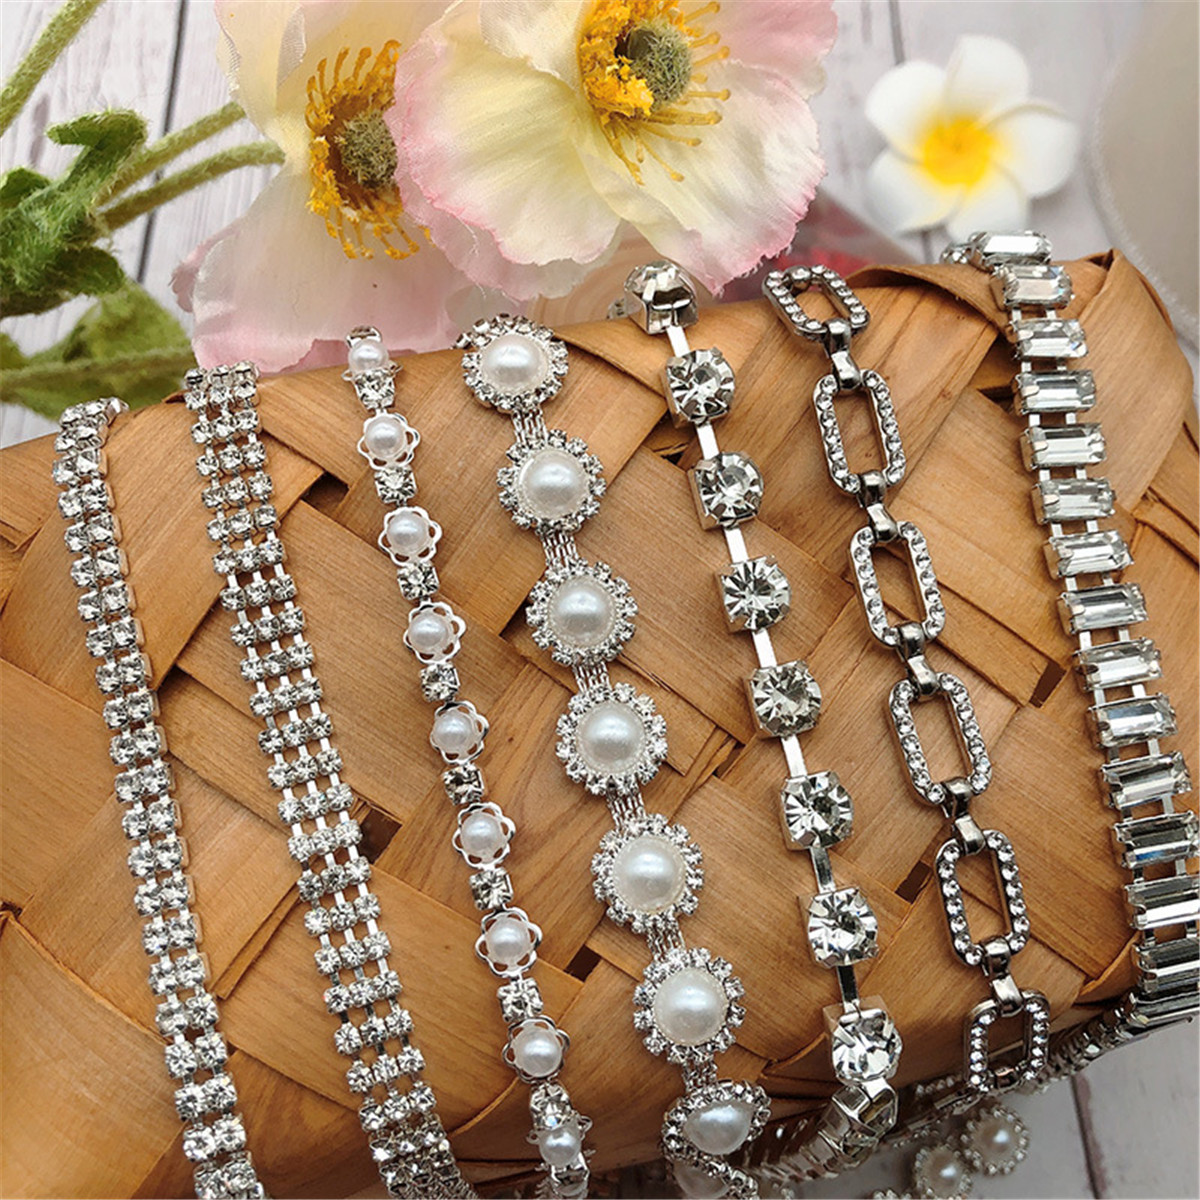 Half Pearls Chain for Embroidery Hoop Decorations, Imitation Pearl Apparel  Sewing Diy Accessories 